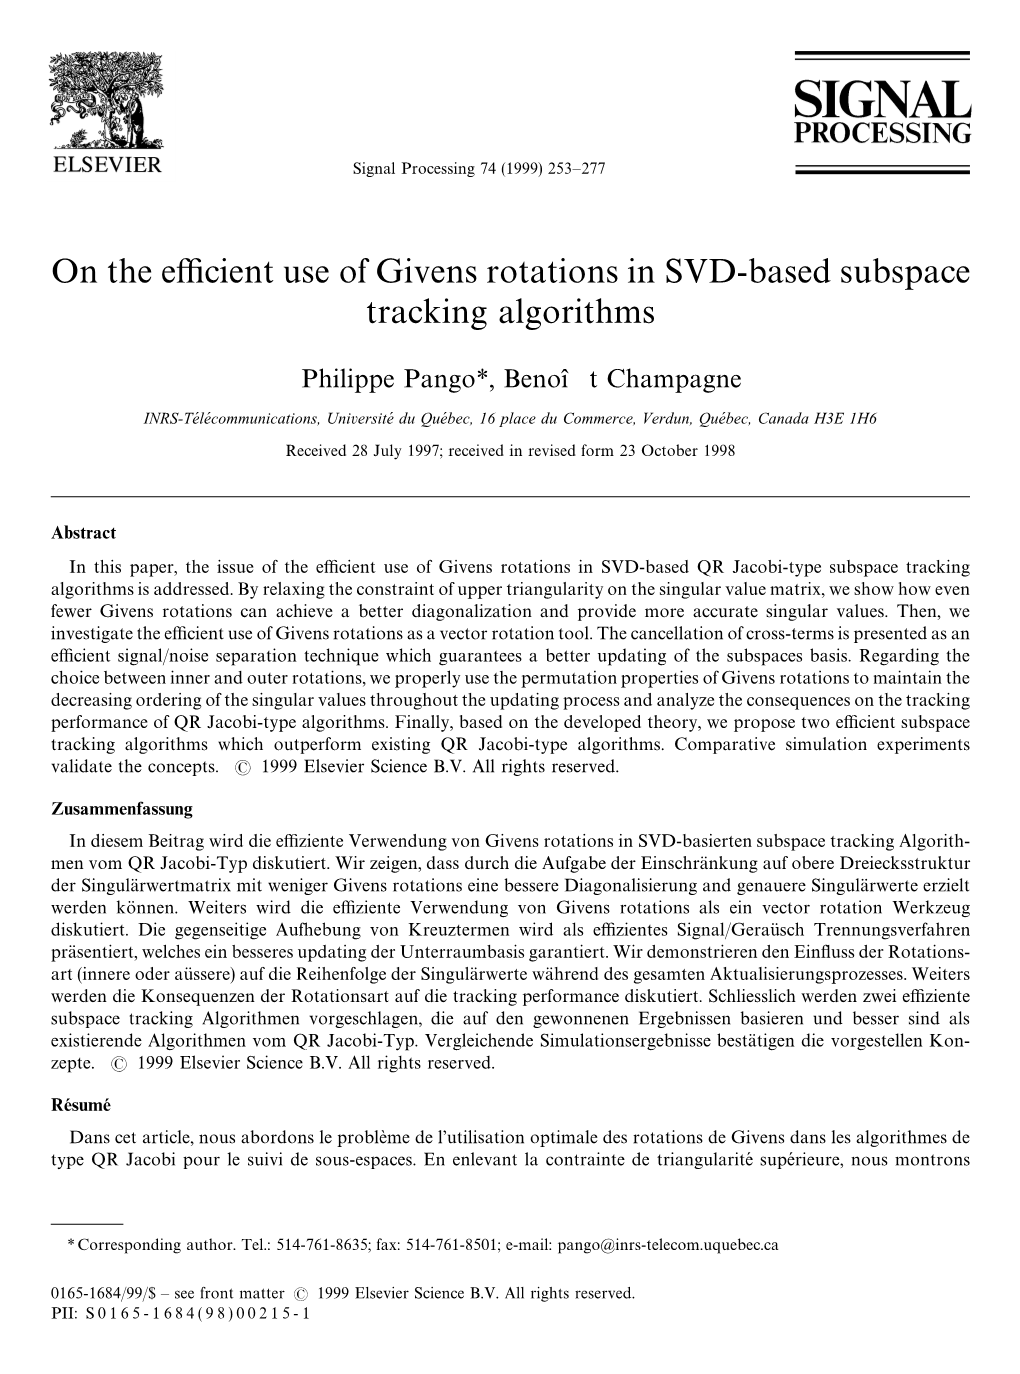 On the Efficient Use of Givens Rotations in SVD-Based Subspace Tracking